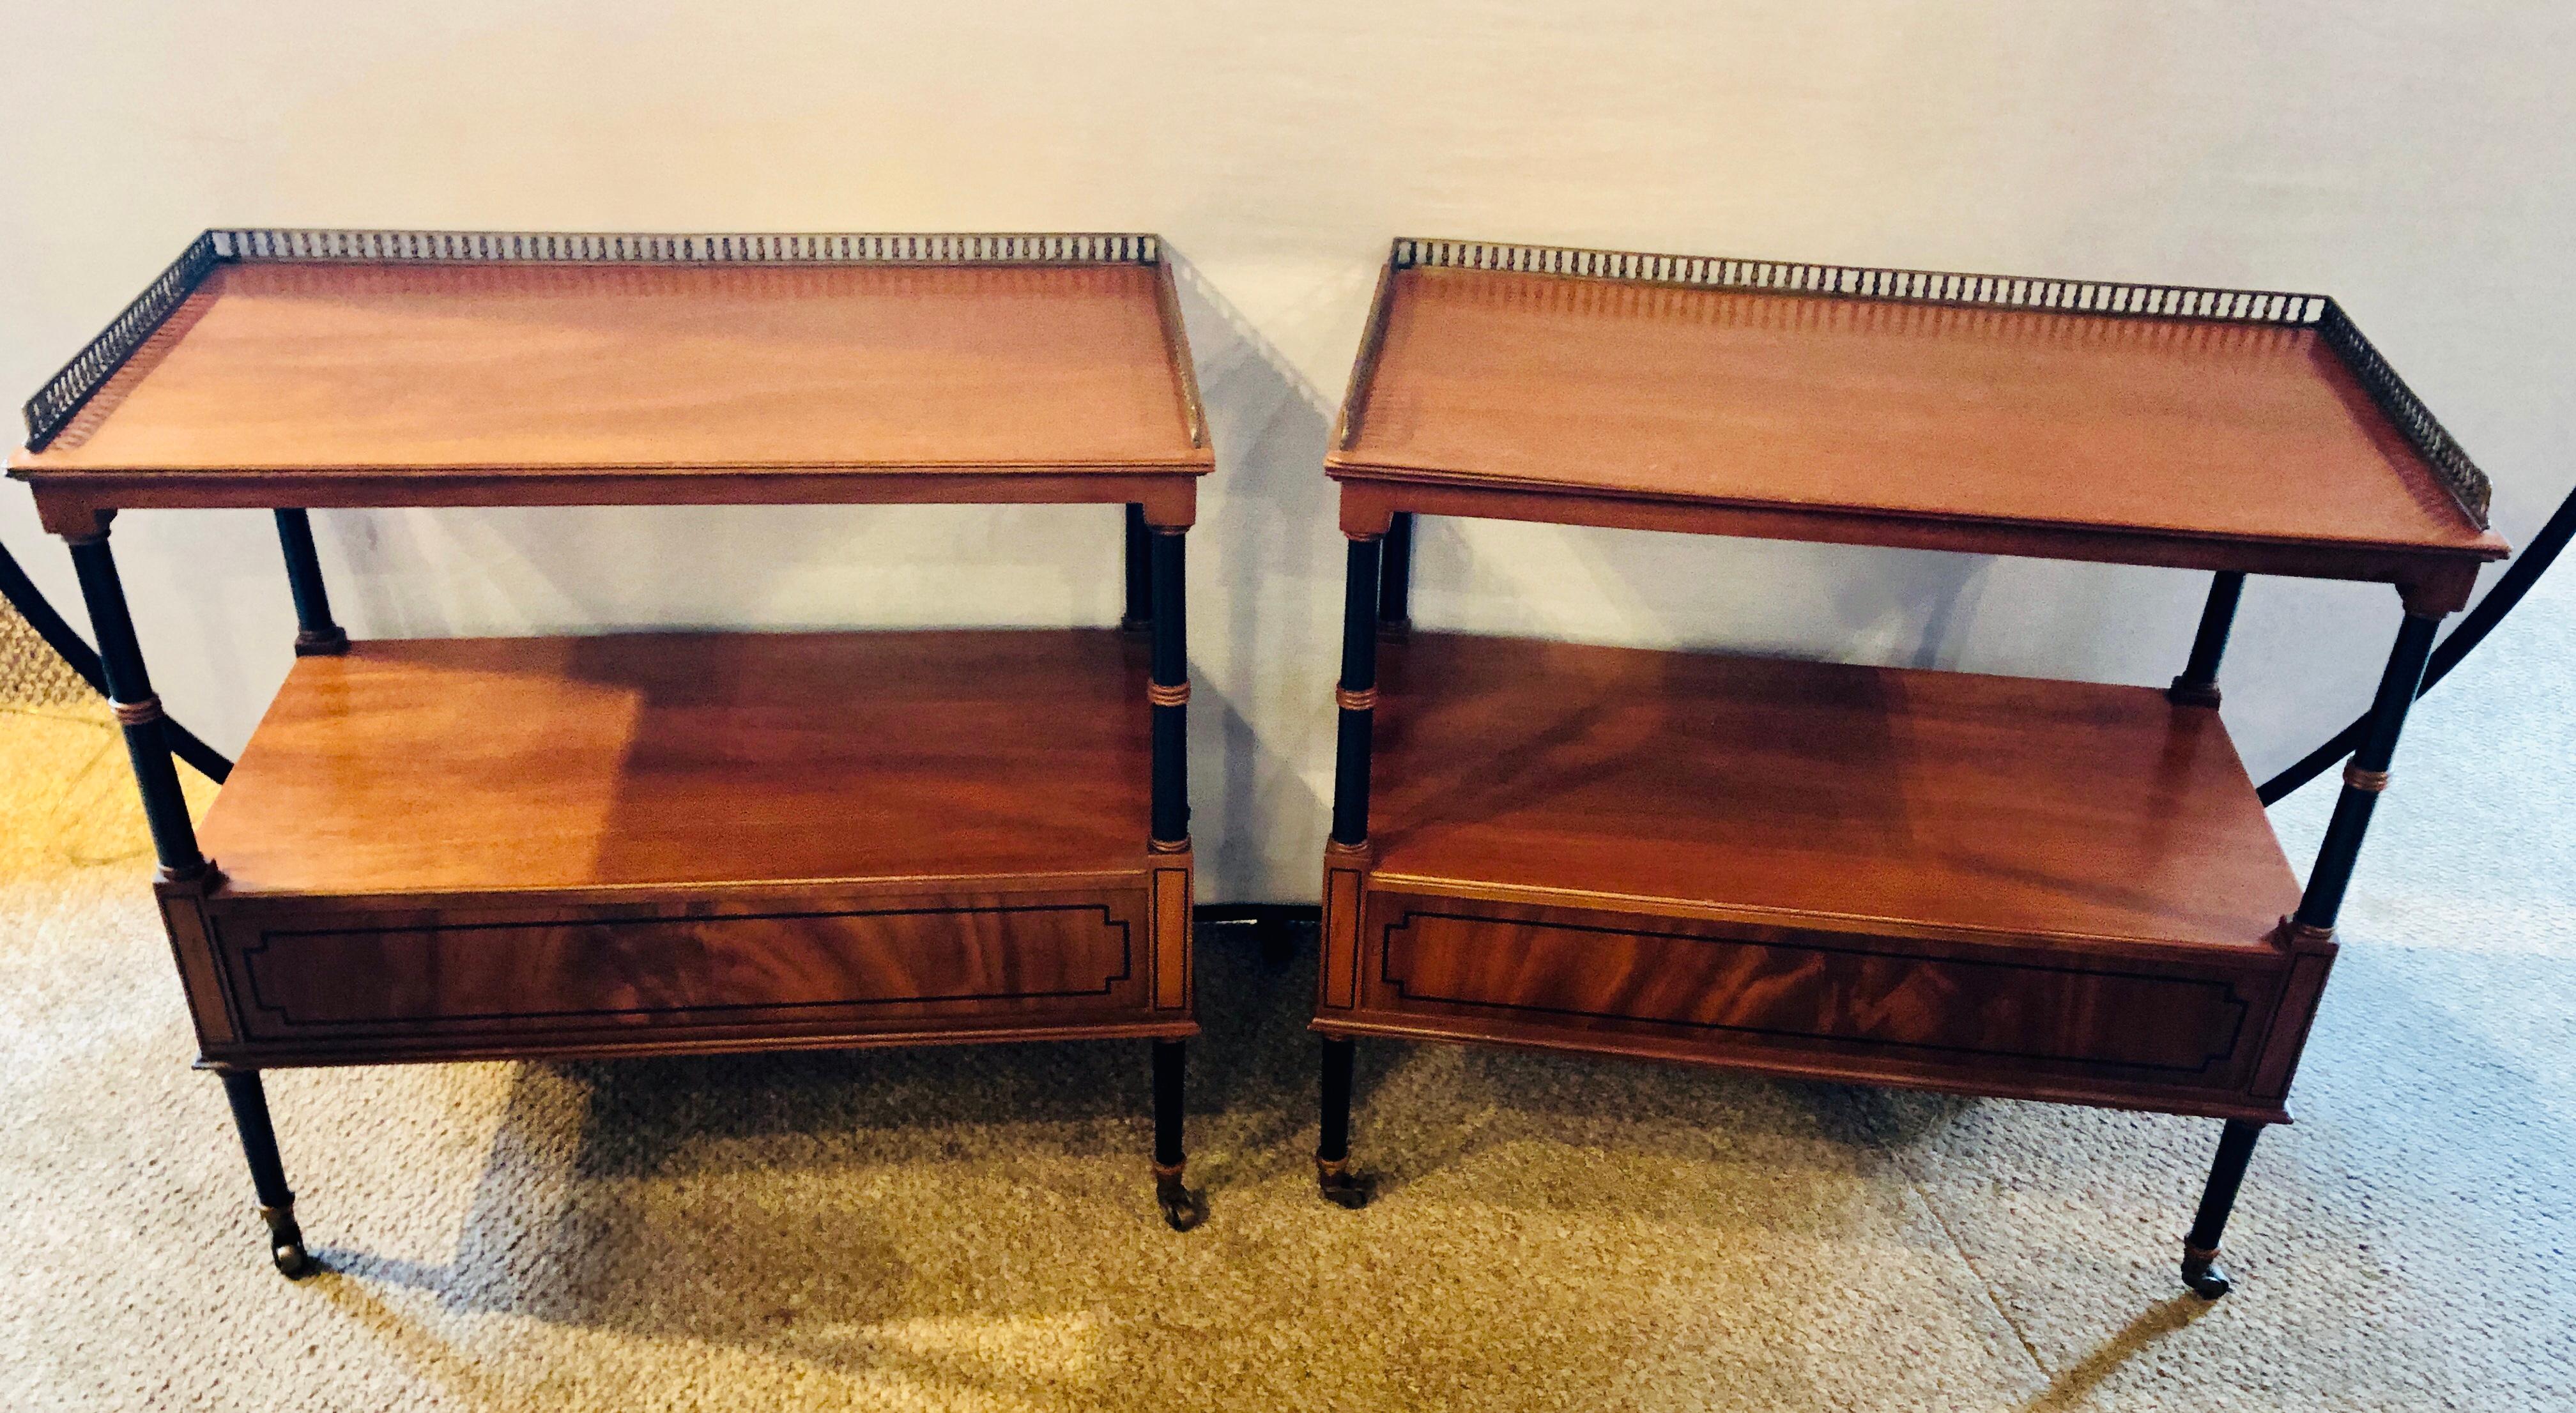 Pair of Beacon Hill mahogany and ebony galleried stands with side drawers.